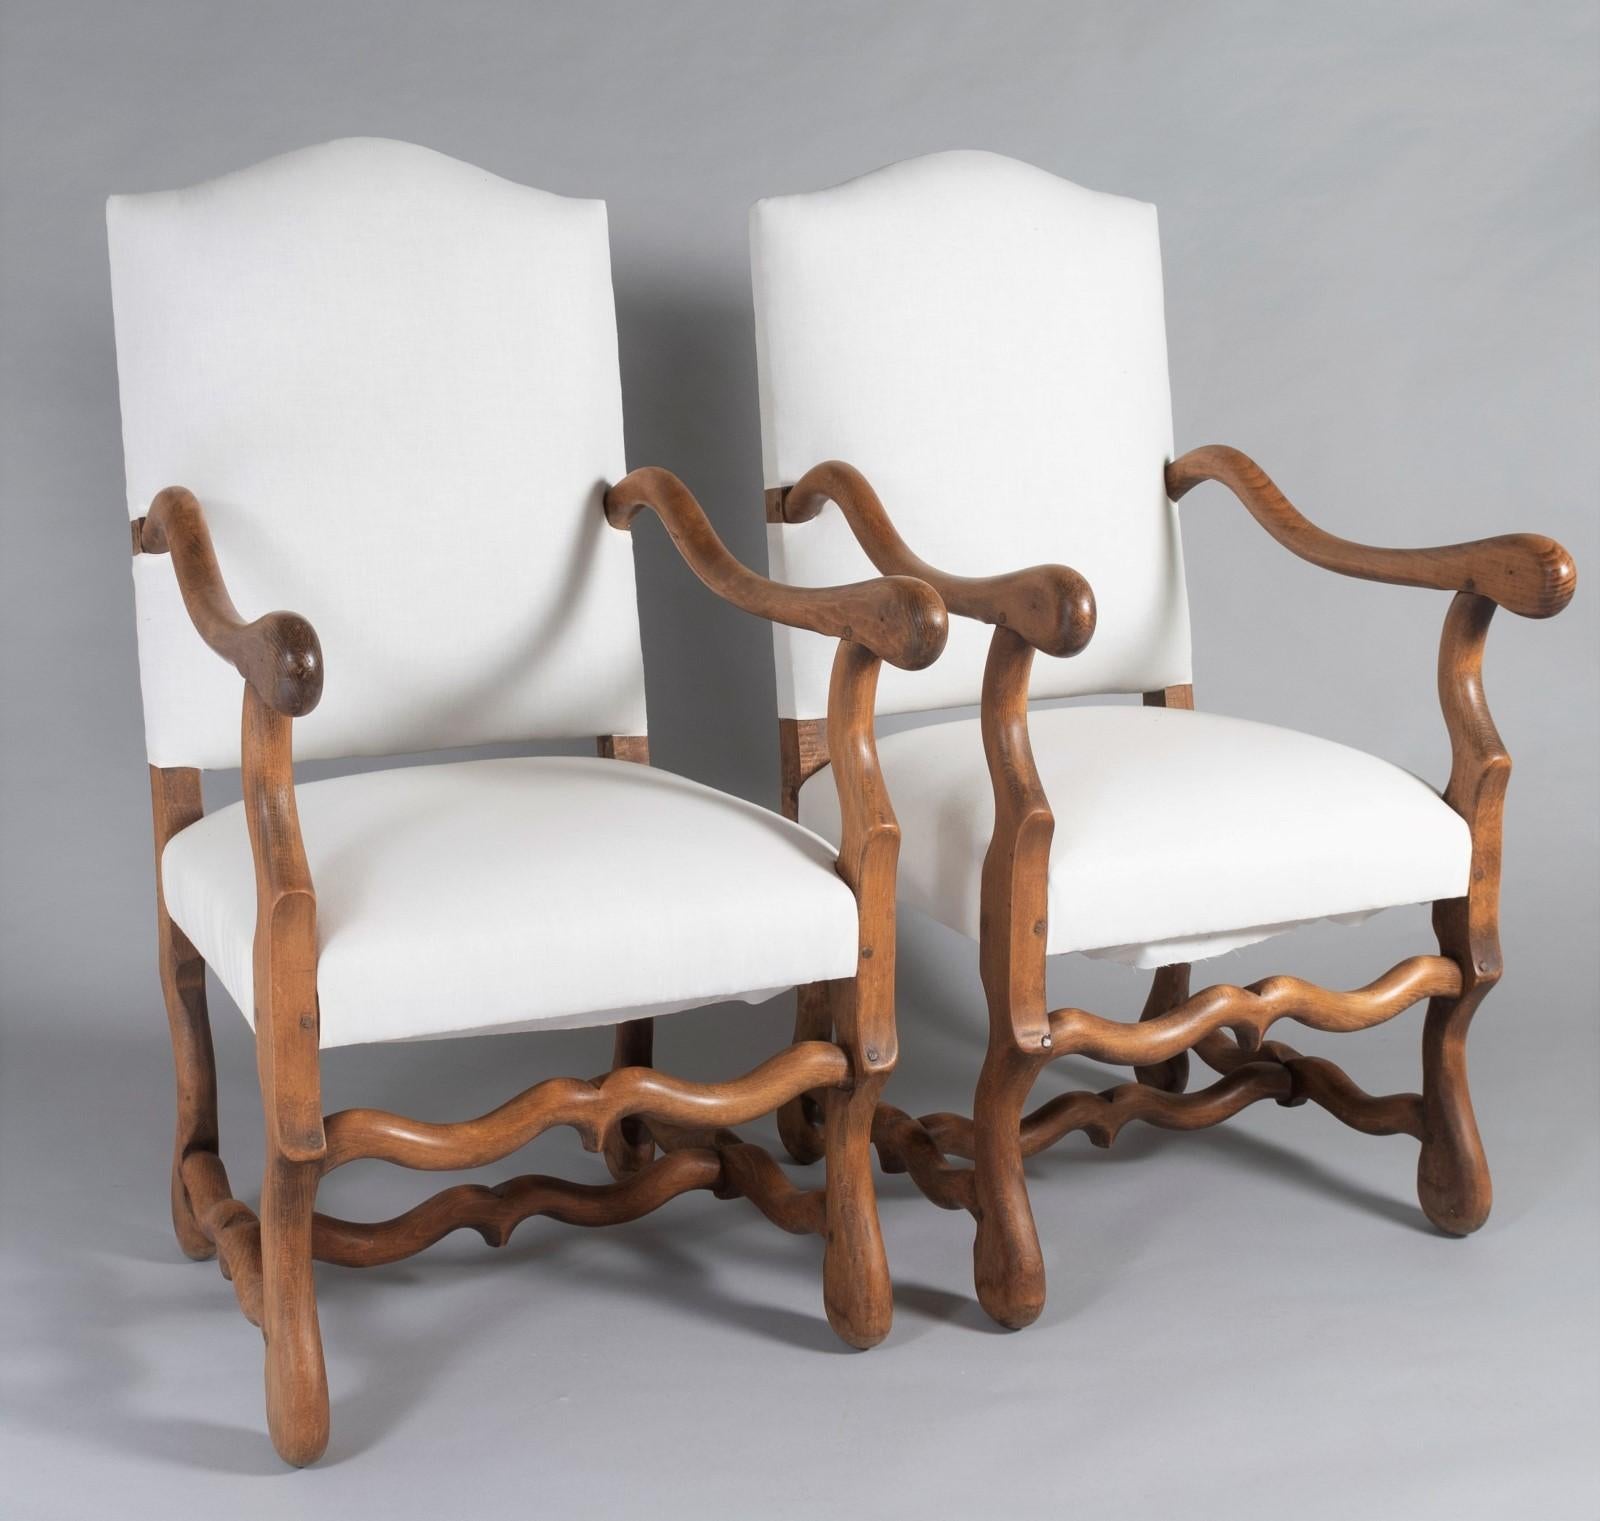 A pair of 19th Century Os de Mouton French Oak Armchairs.  A very well made high quality pair, having the right proportions and form with square pegged joints.
Made from French oak, these have a wonderful warm tone, a decorative pair that could work